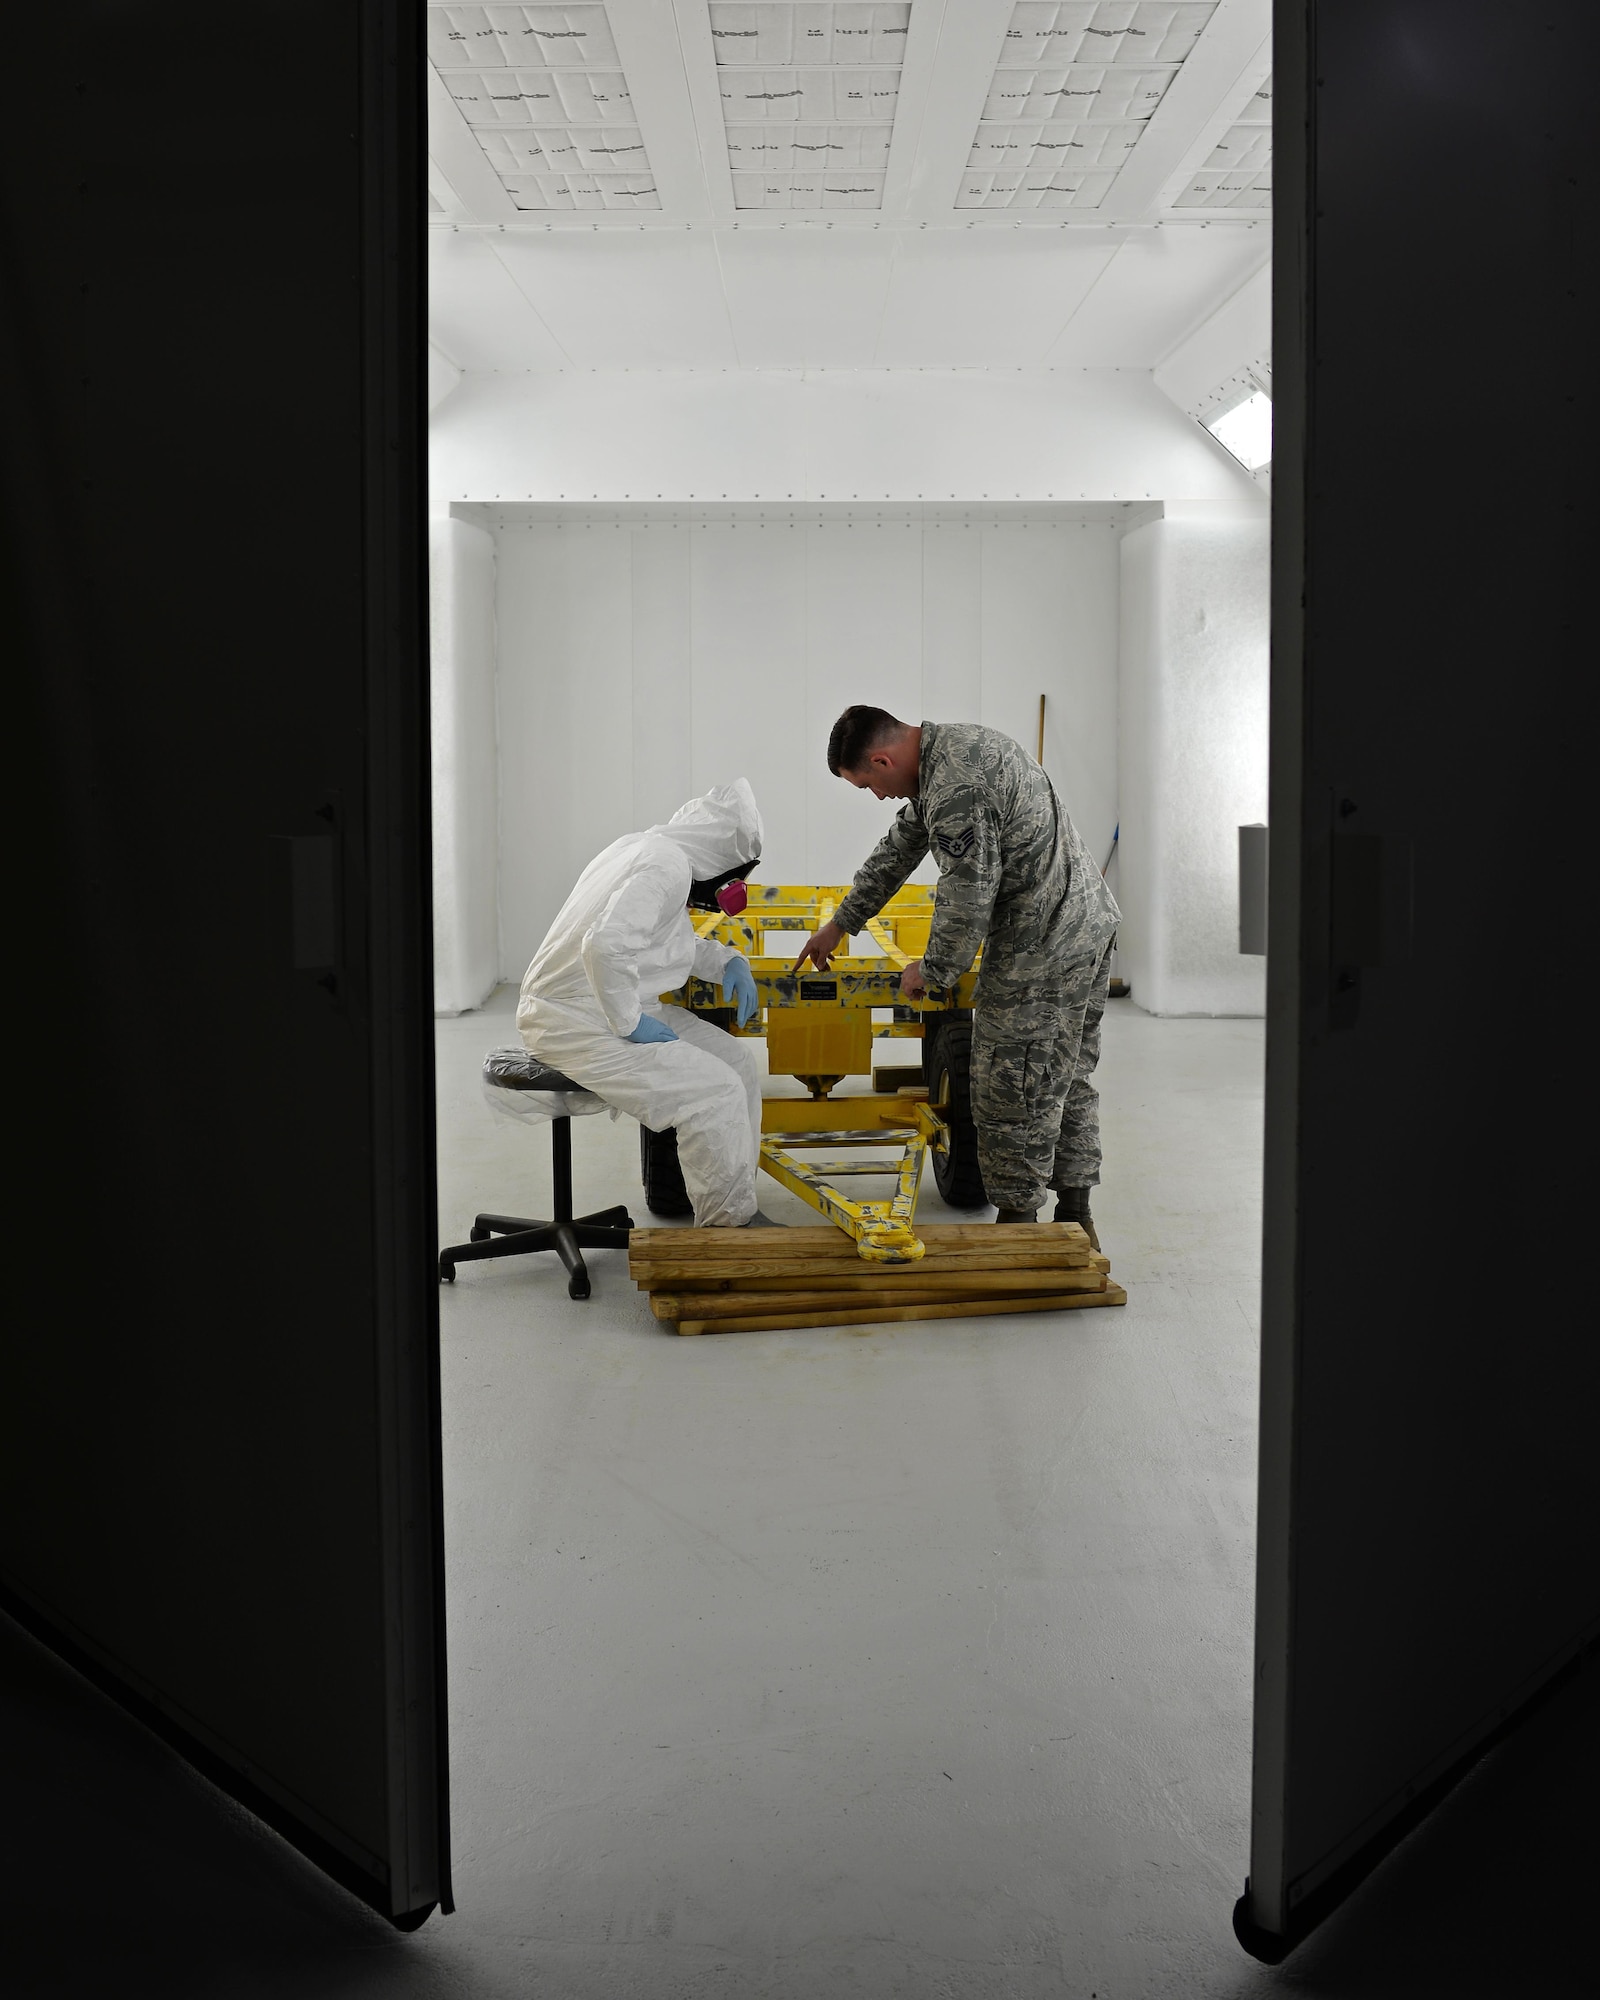 Senior Airman Jeremy Washington, 374th Maintenance Squadron aircraft structural journeyman, deployed from Yokota Air Base, Japan, (left) and U.S. Air Force Staff Sgt. Brendan McCormick, 36th Maintenance Squadron corrosion control NCO in charge, inspect a weapons trailer June 27, 2017, at Andersen Air Force Base, Guam. Airmen began work in Andersen’s new temporary corrosion control facility June 5th. (U.S. Air Force photo by Senior Airman Alexa Ann Henderson)